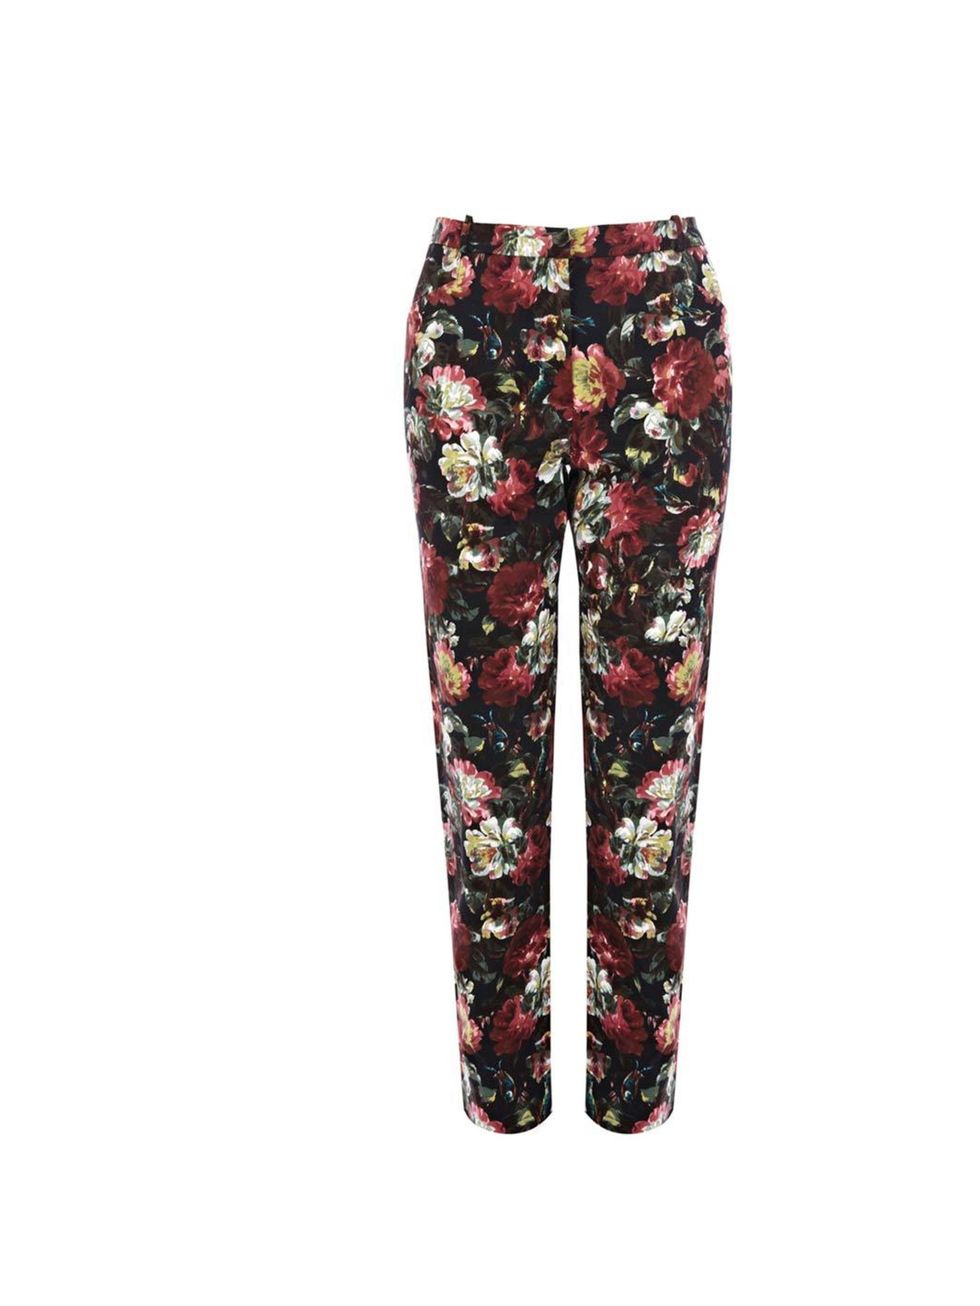 <p>I'll wear these floral trousers with a black Alexander Wang vest and a pair of chelsea boots.</p><p>- Molly Haylor, Fashion Assistant</p><p><a href="http://www.oasis-stores.com/winter-rose-print-audrey-trouser/clothing/oasis/fcp-product/3450162858">Oas